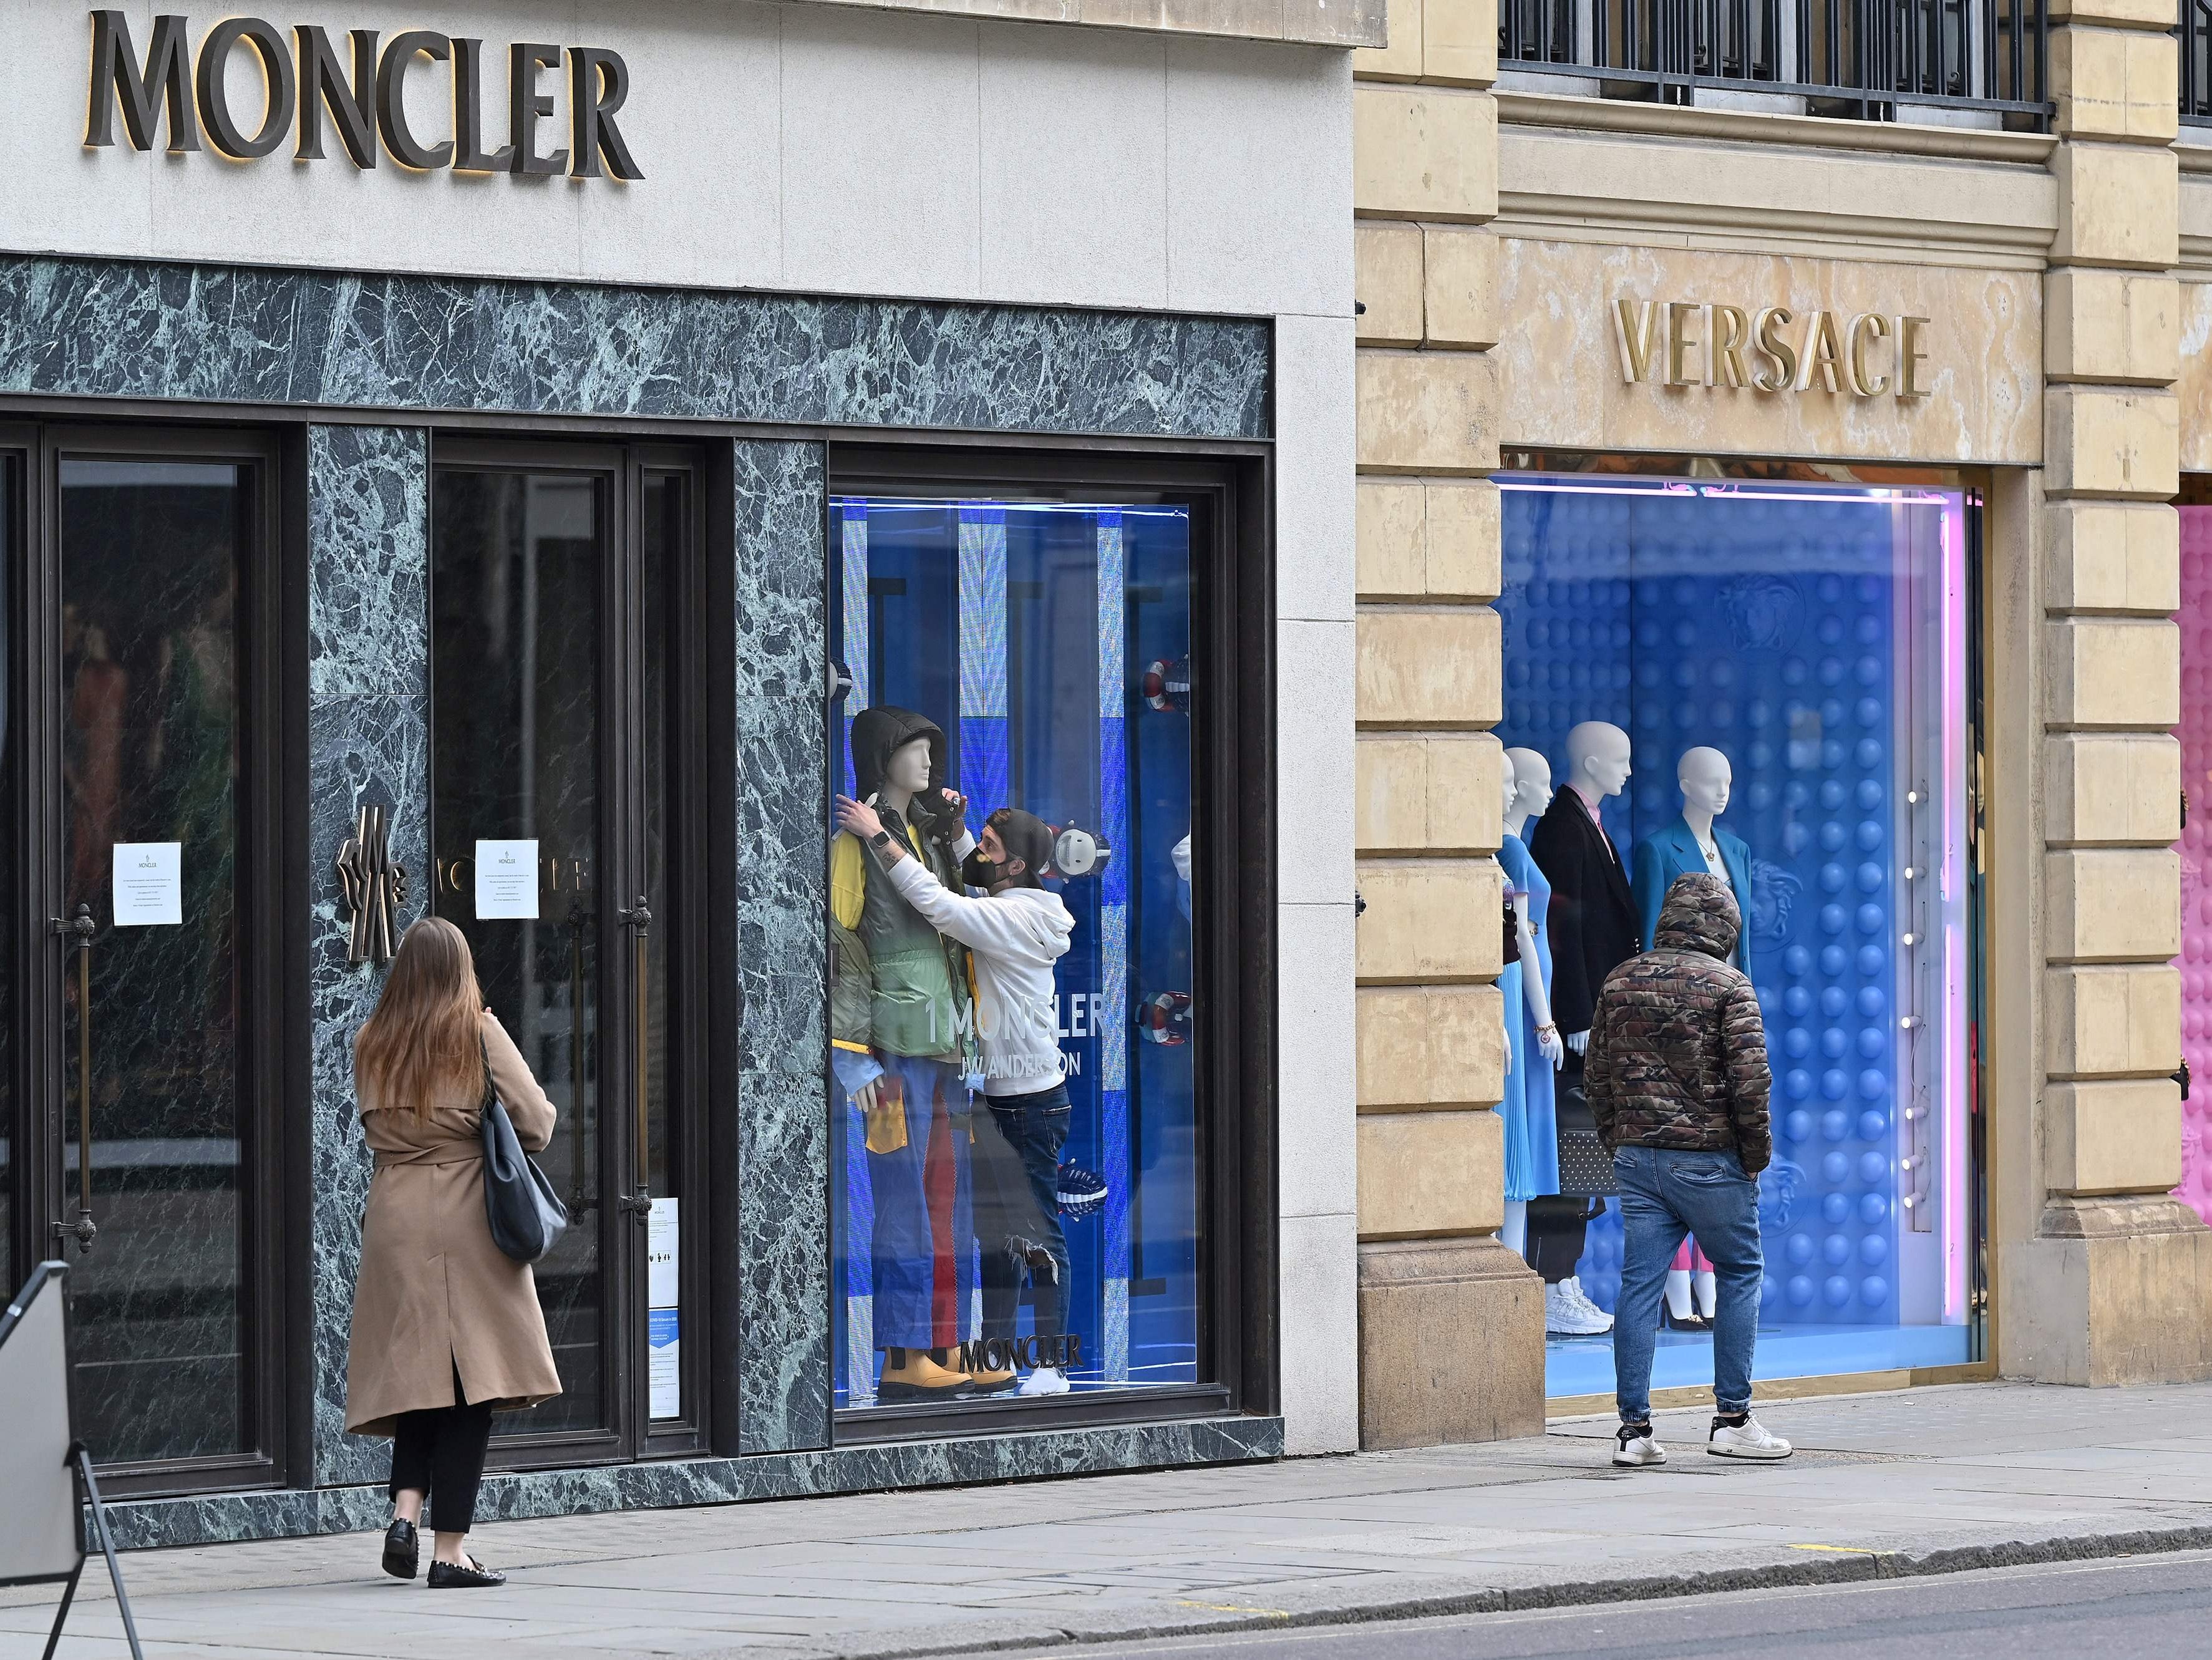 A worker organises clothes on a mannequin in the window display of a Moncler shop, closed down due to Covid-19 restrictions, in London